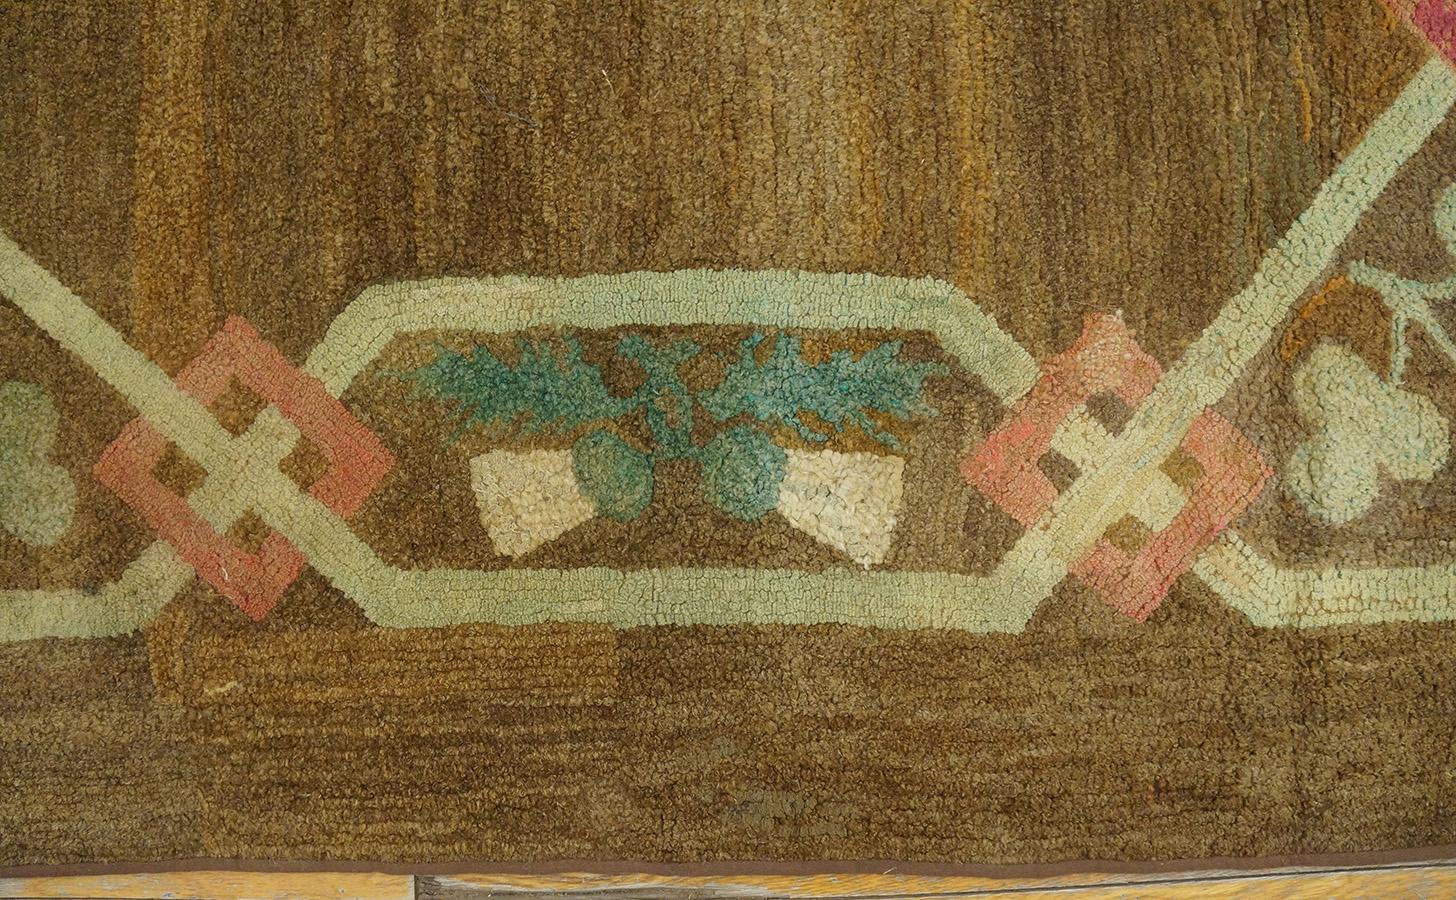 Early 20th Century American Hooked Rug ( 5' 9''x5' 10'' - 175 x 177 cm ) For Sale 8